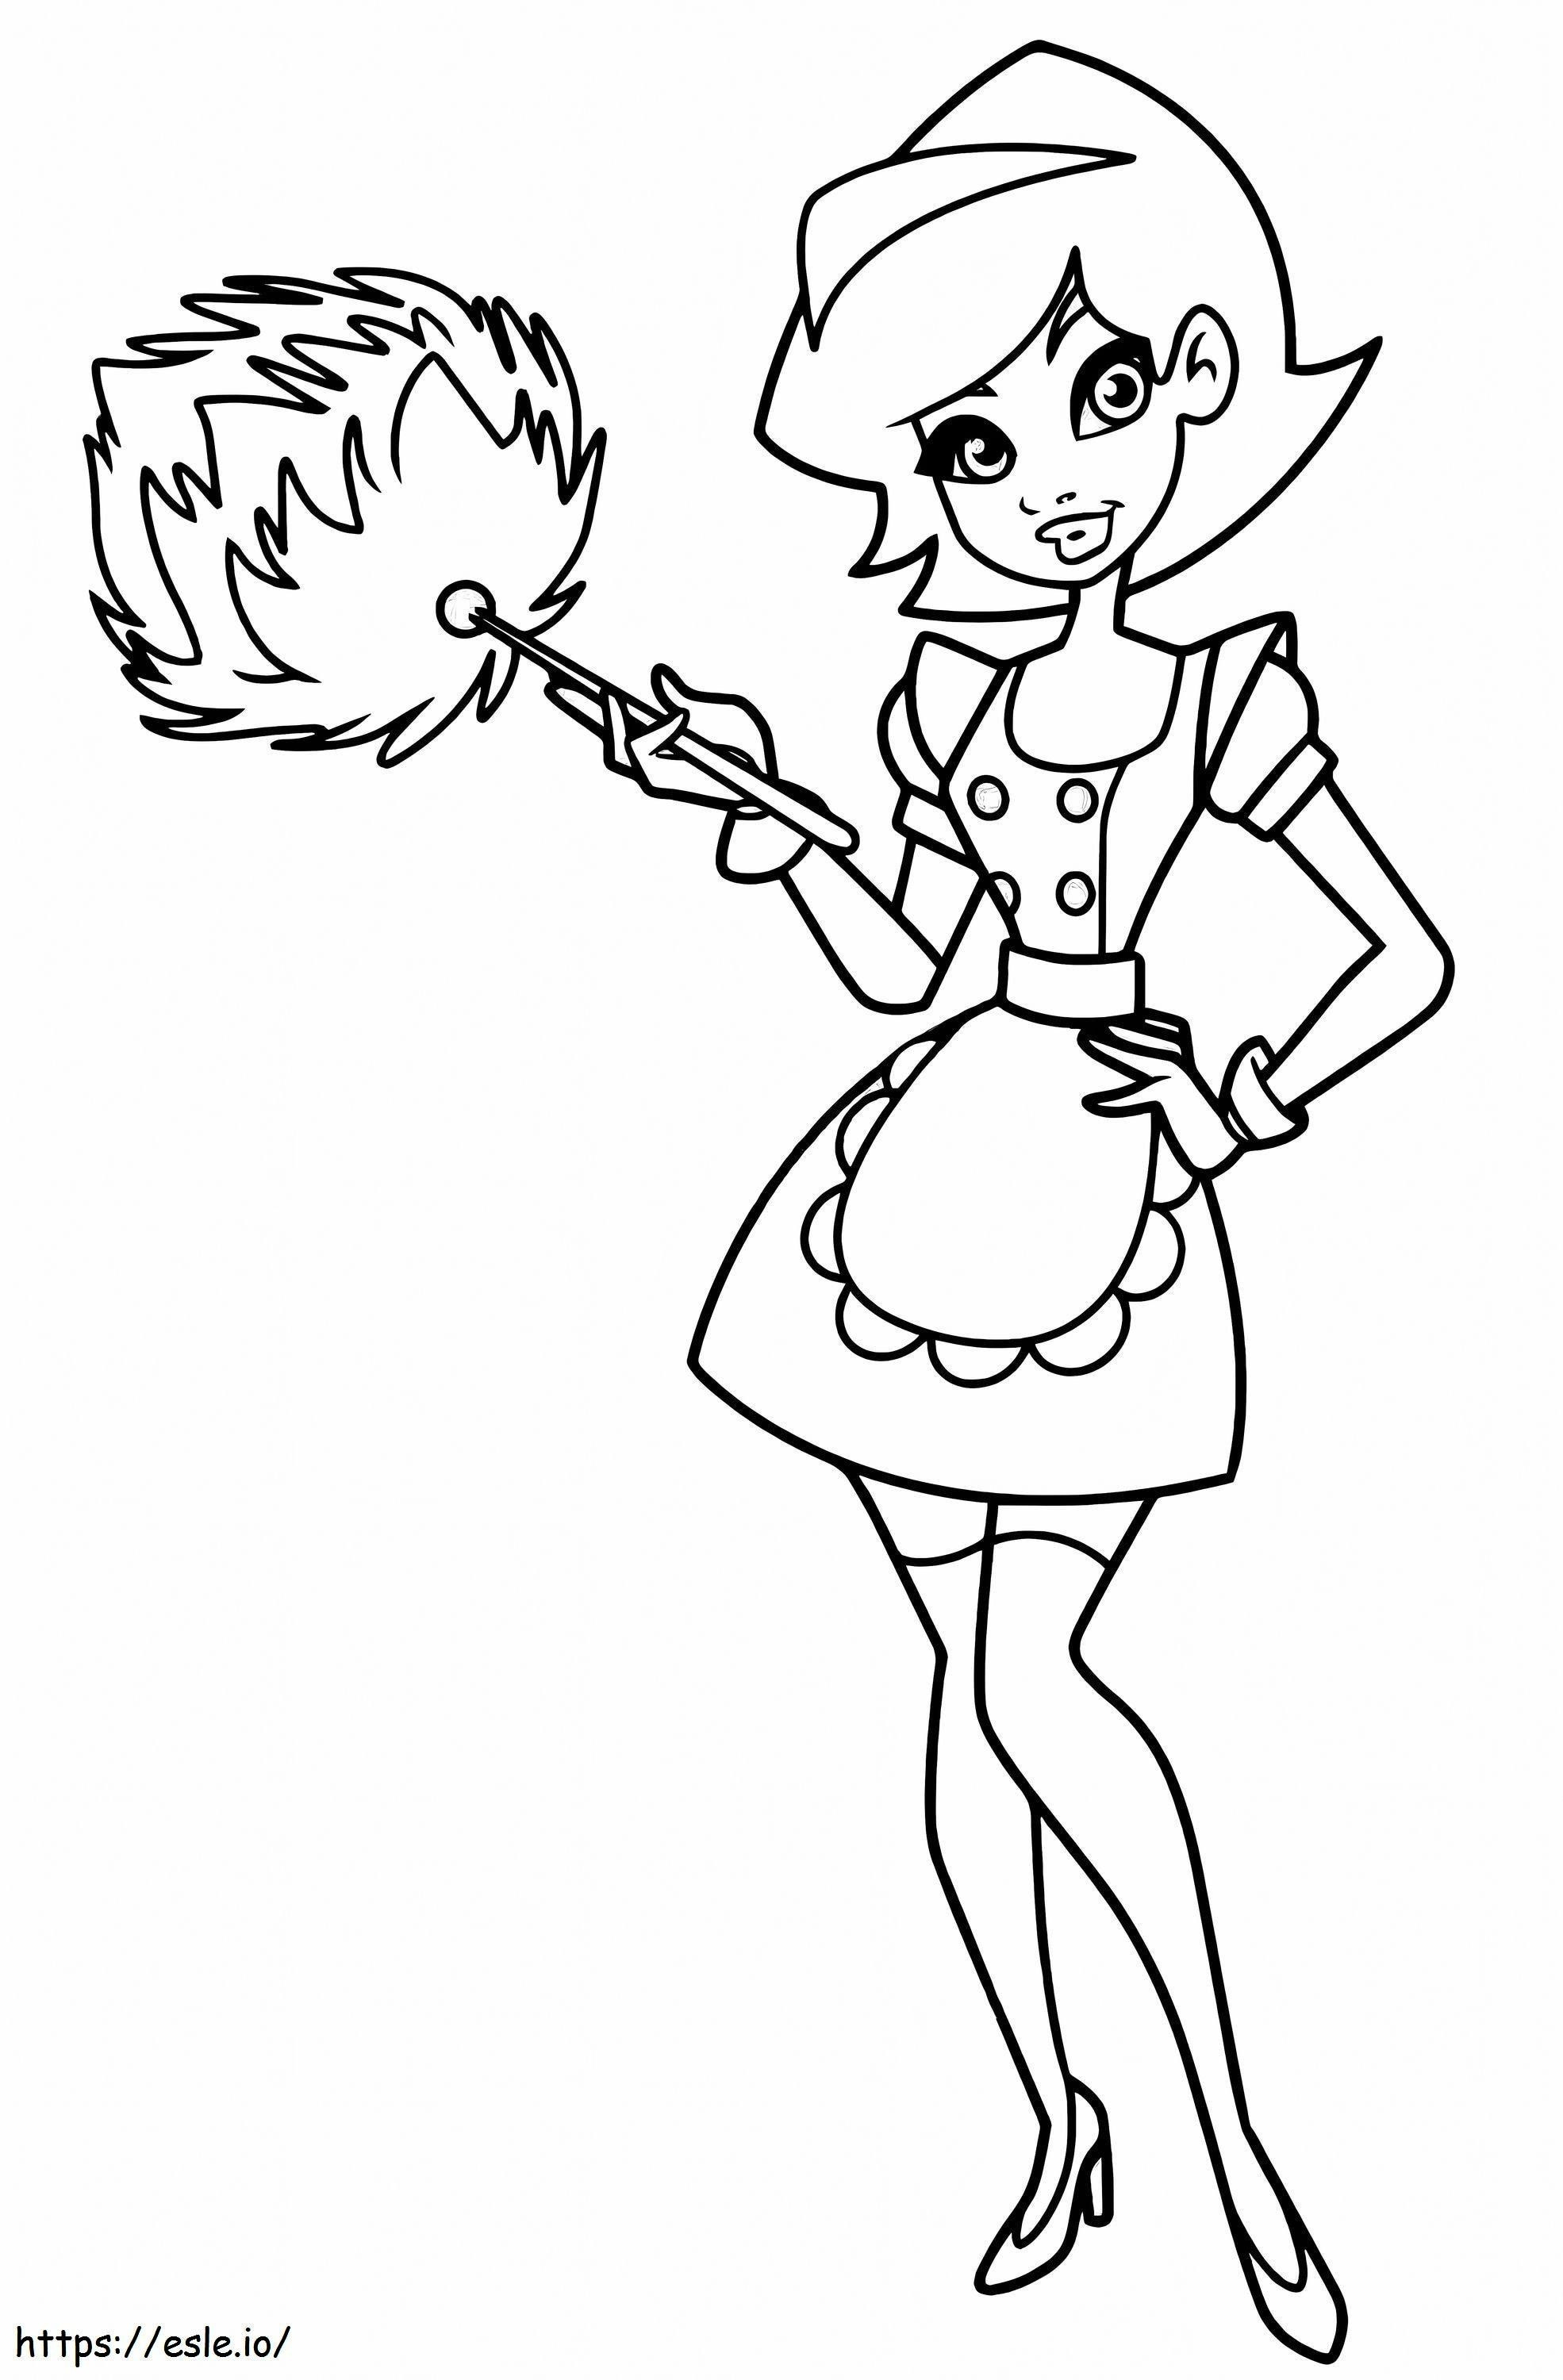 Maid 6 coloring page